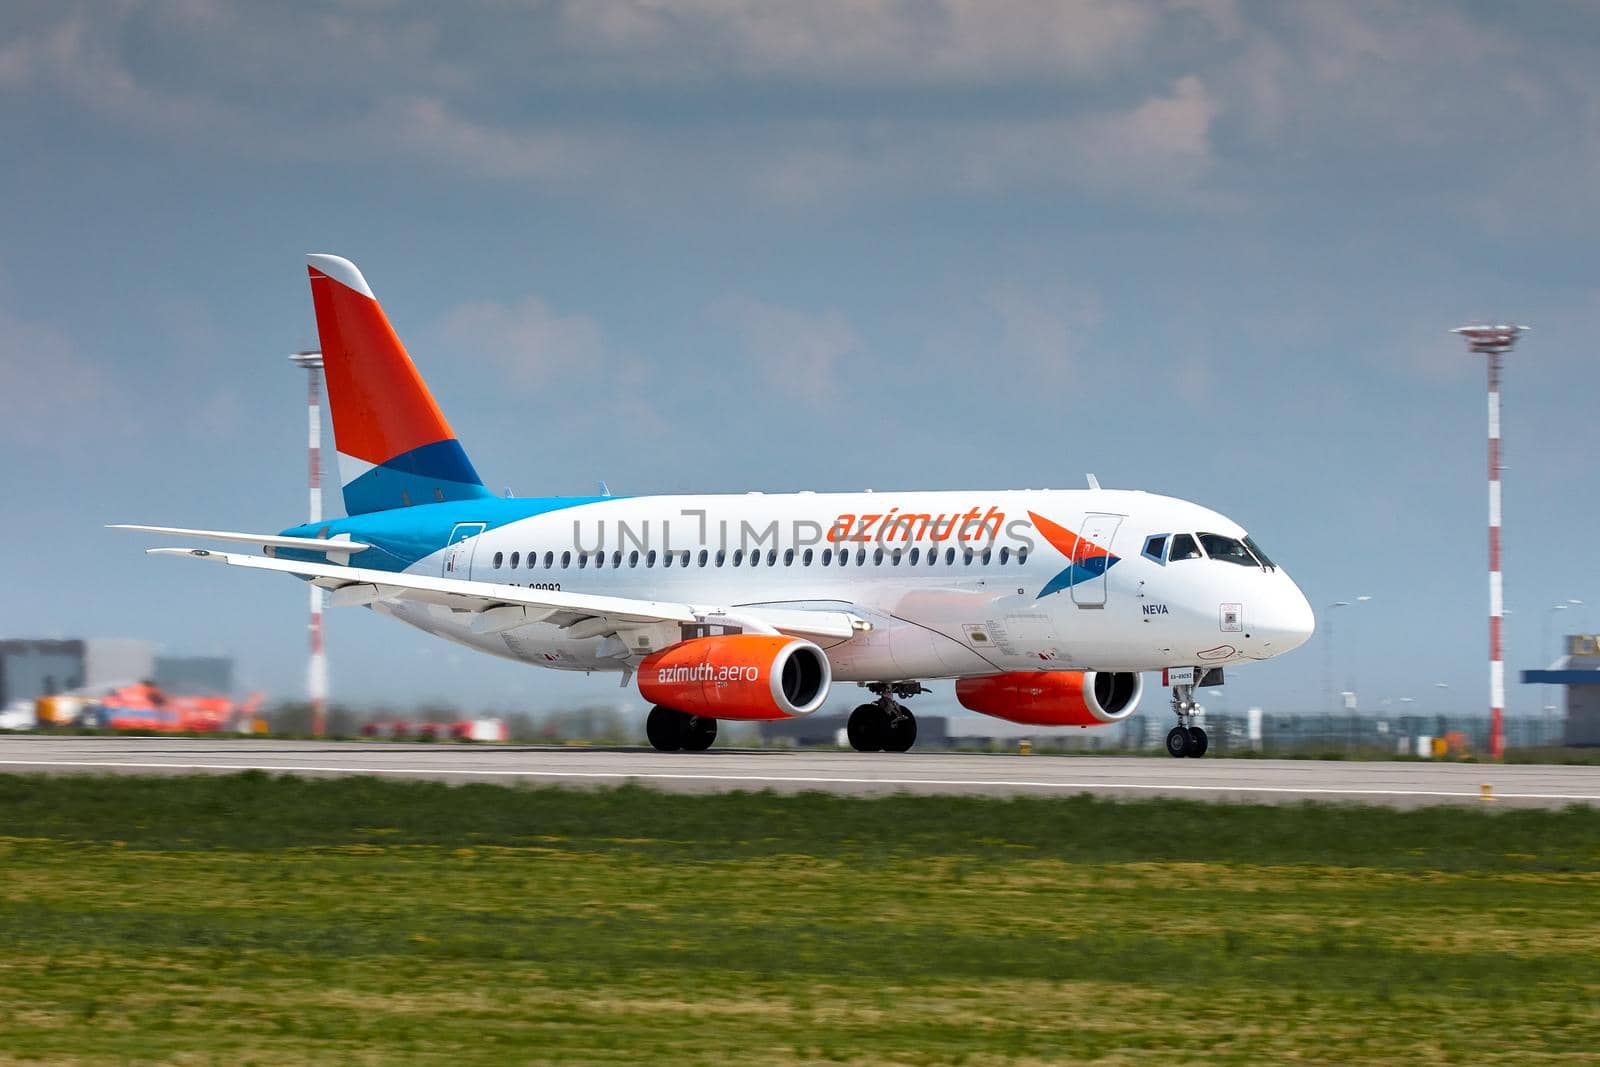 Aircraft Sukhoi Superjet 100 RA-89079 Azimut airlines takes off in airport Platov. Spotting at the airport Platov. 24.05.2019 ROSTOV-ON-DON, RUSSIA. by EvgeniyQW